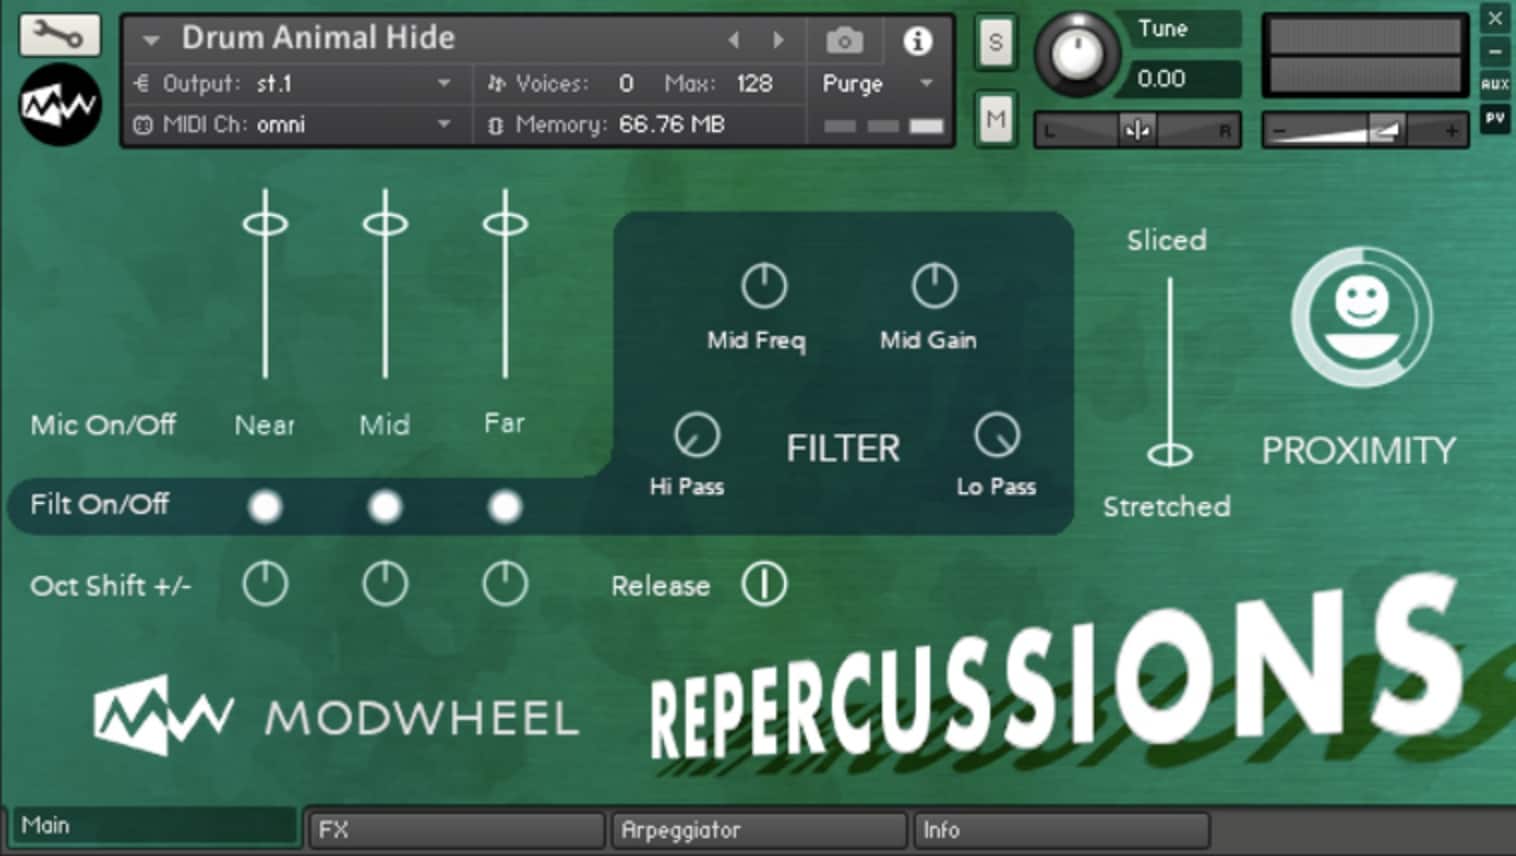 Get-Excited-for-Modwheels-Launch-of-REPERCUSSIONS-Kontakt-Percussive-Instruments-and-More-UI